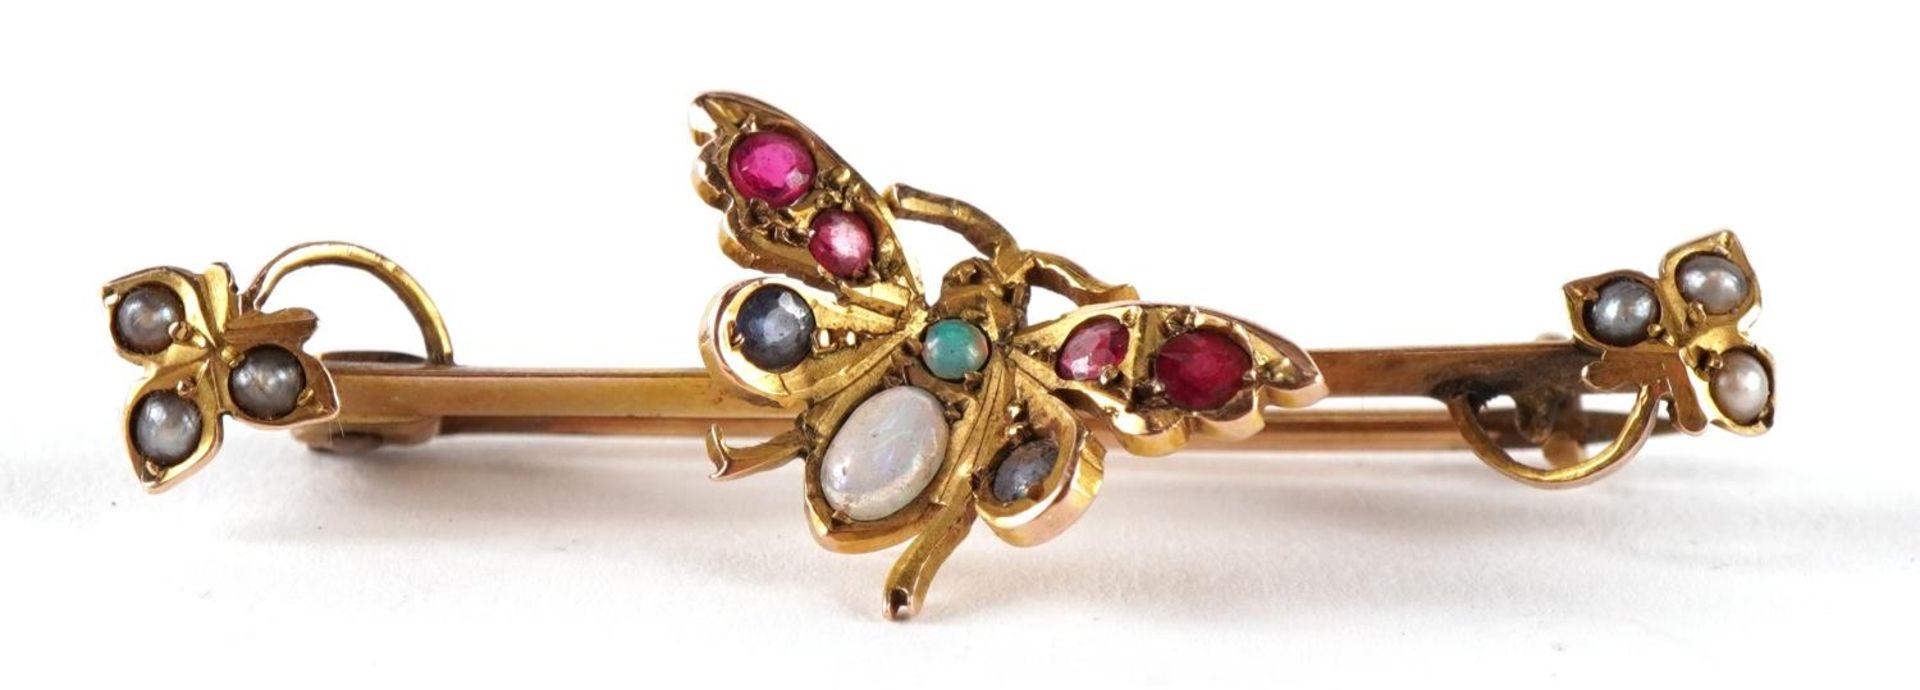 Victorian 9ct gold butterfly brooch set with seed pearls, opals and red stones housed in a tooled